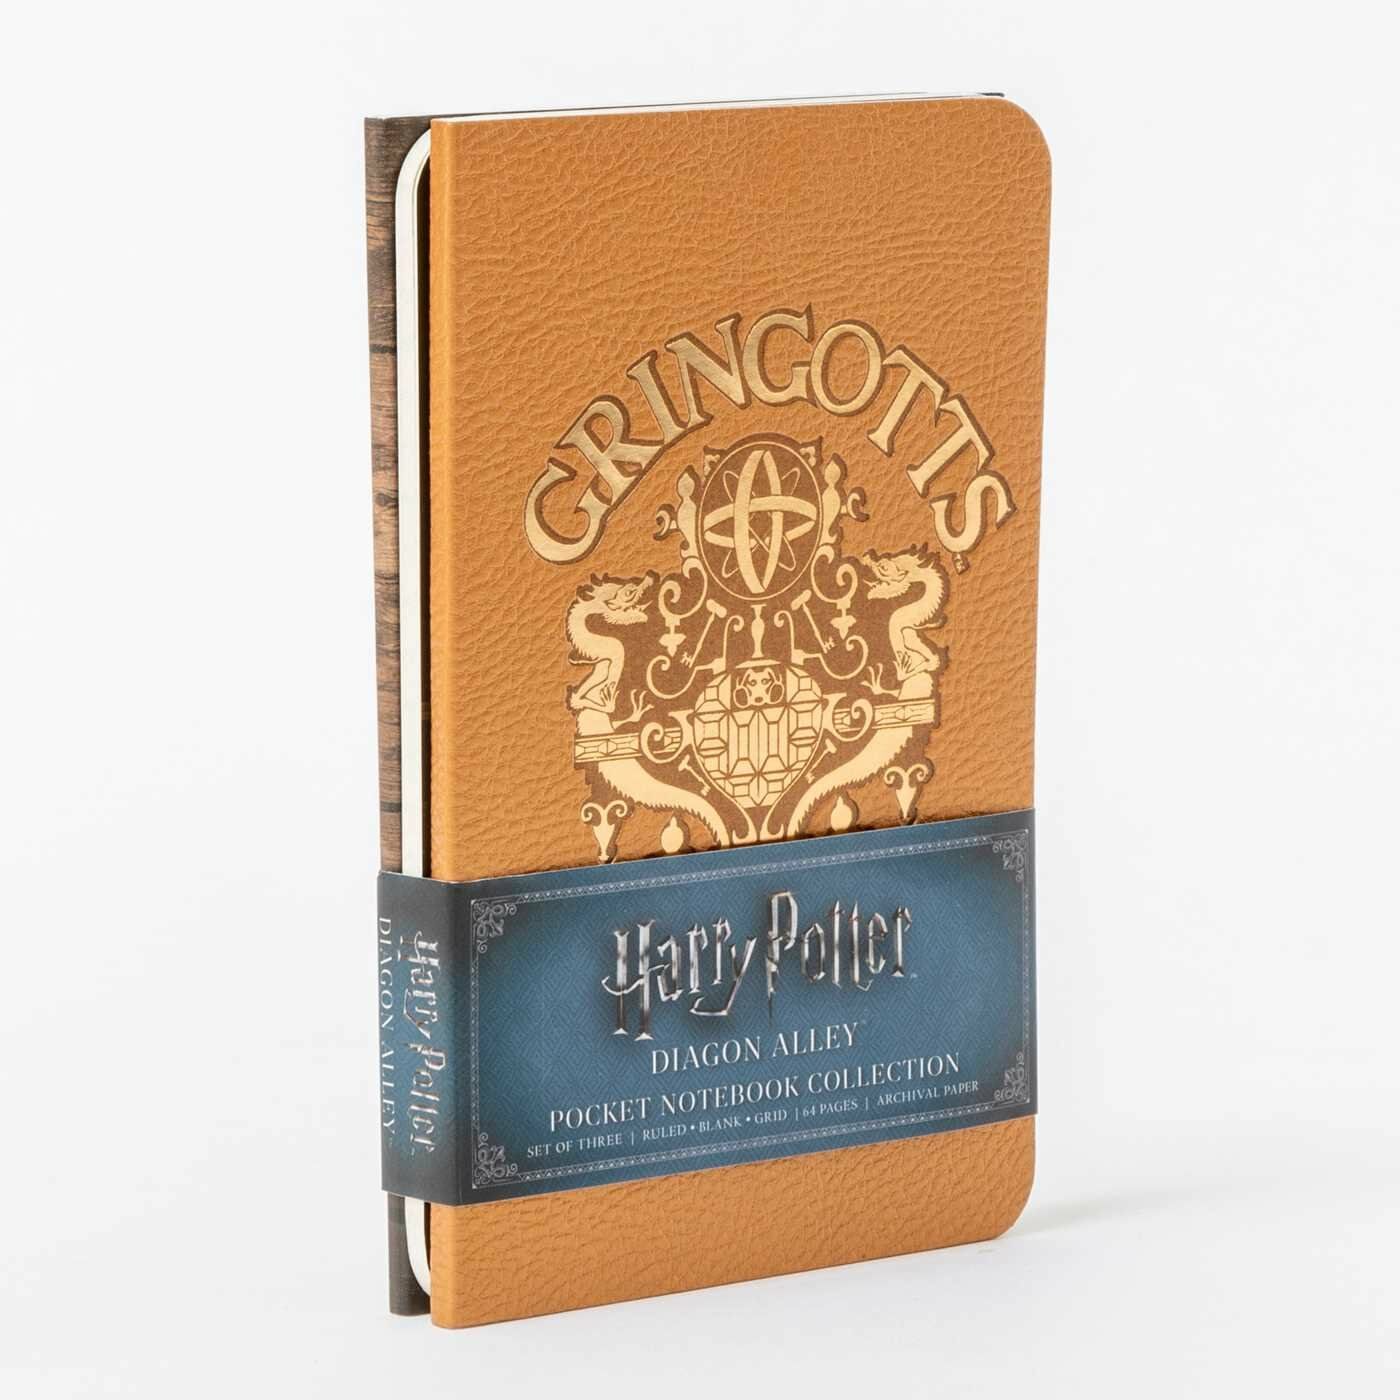 Harry Potter: Diagon Alley Pocket Notebook Collection (Paperback)